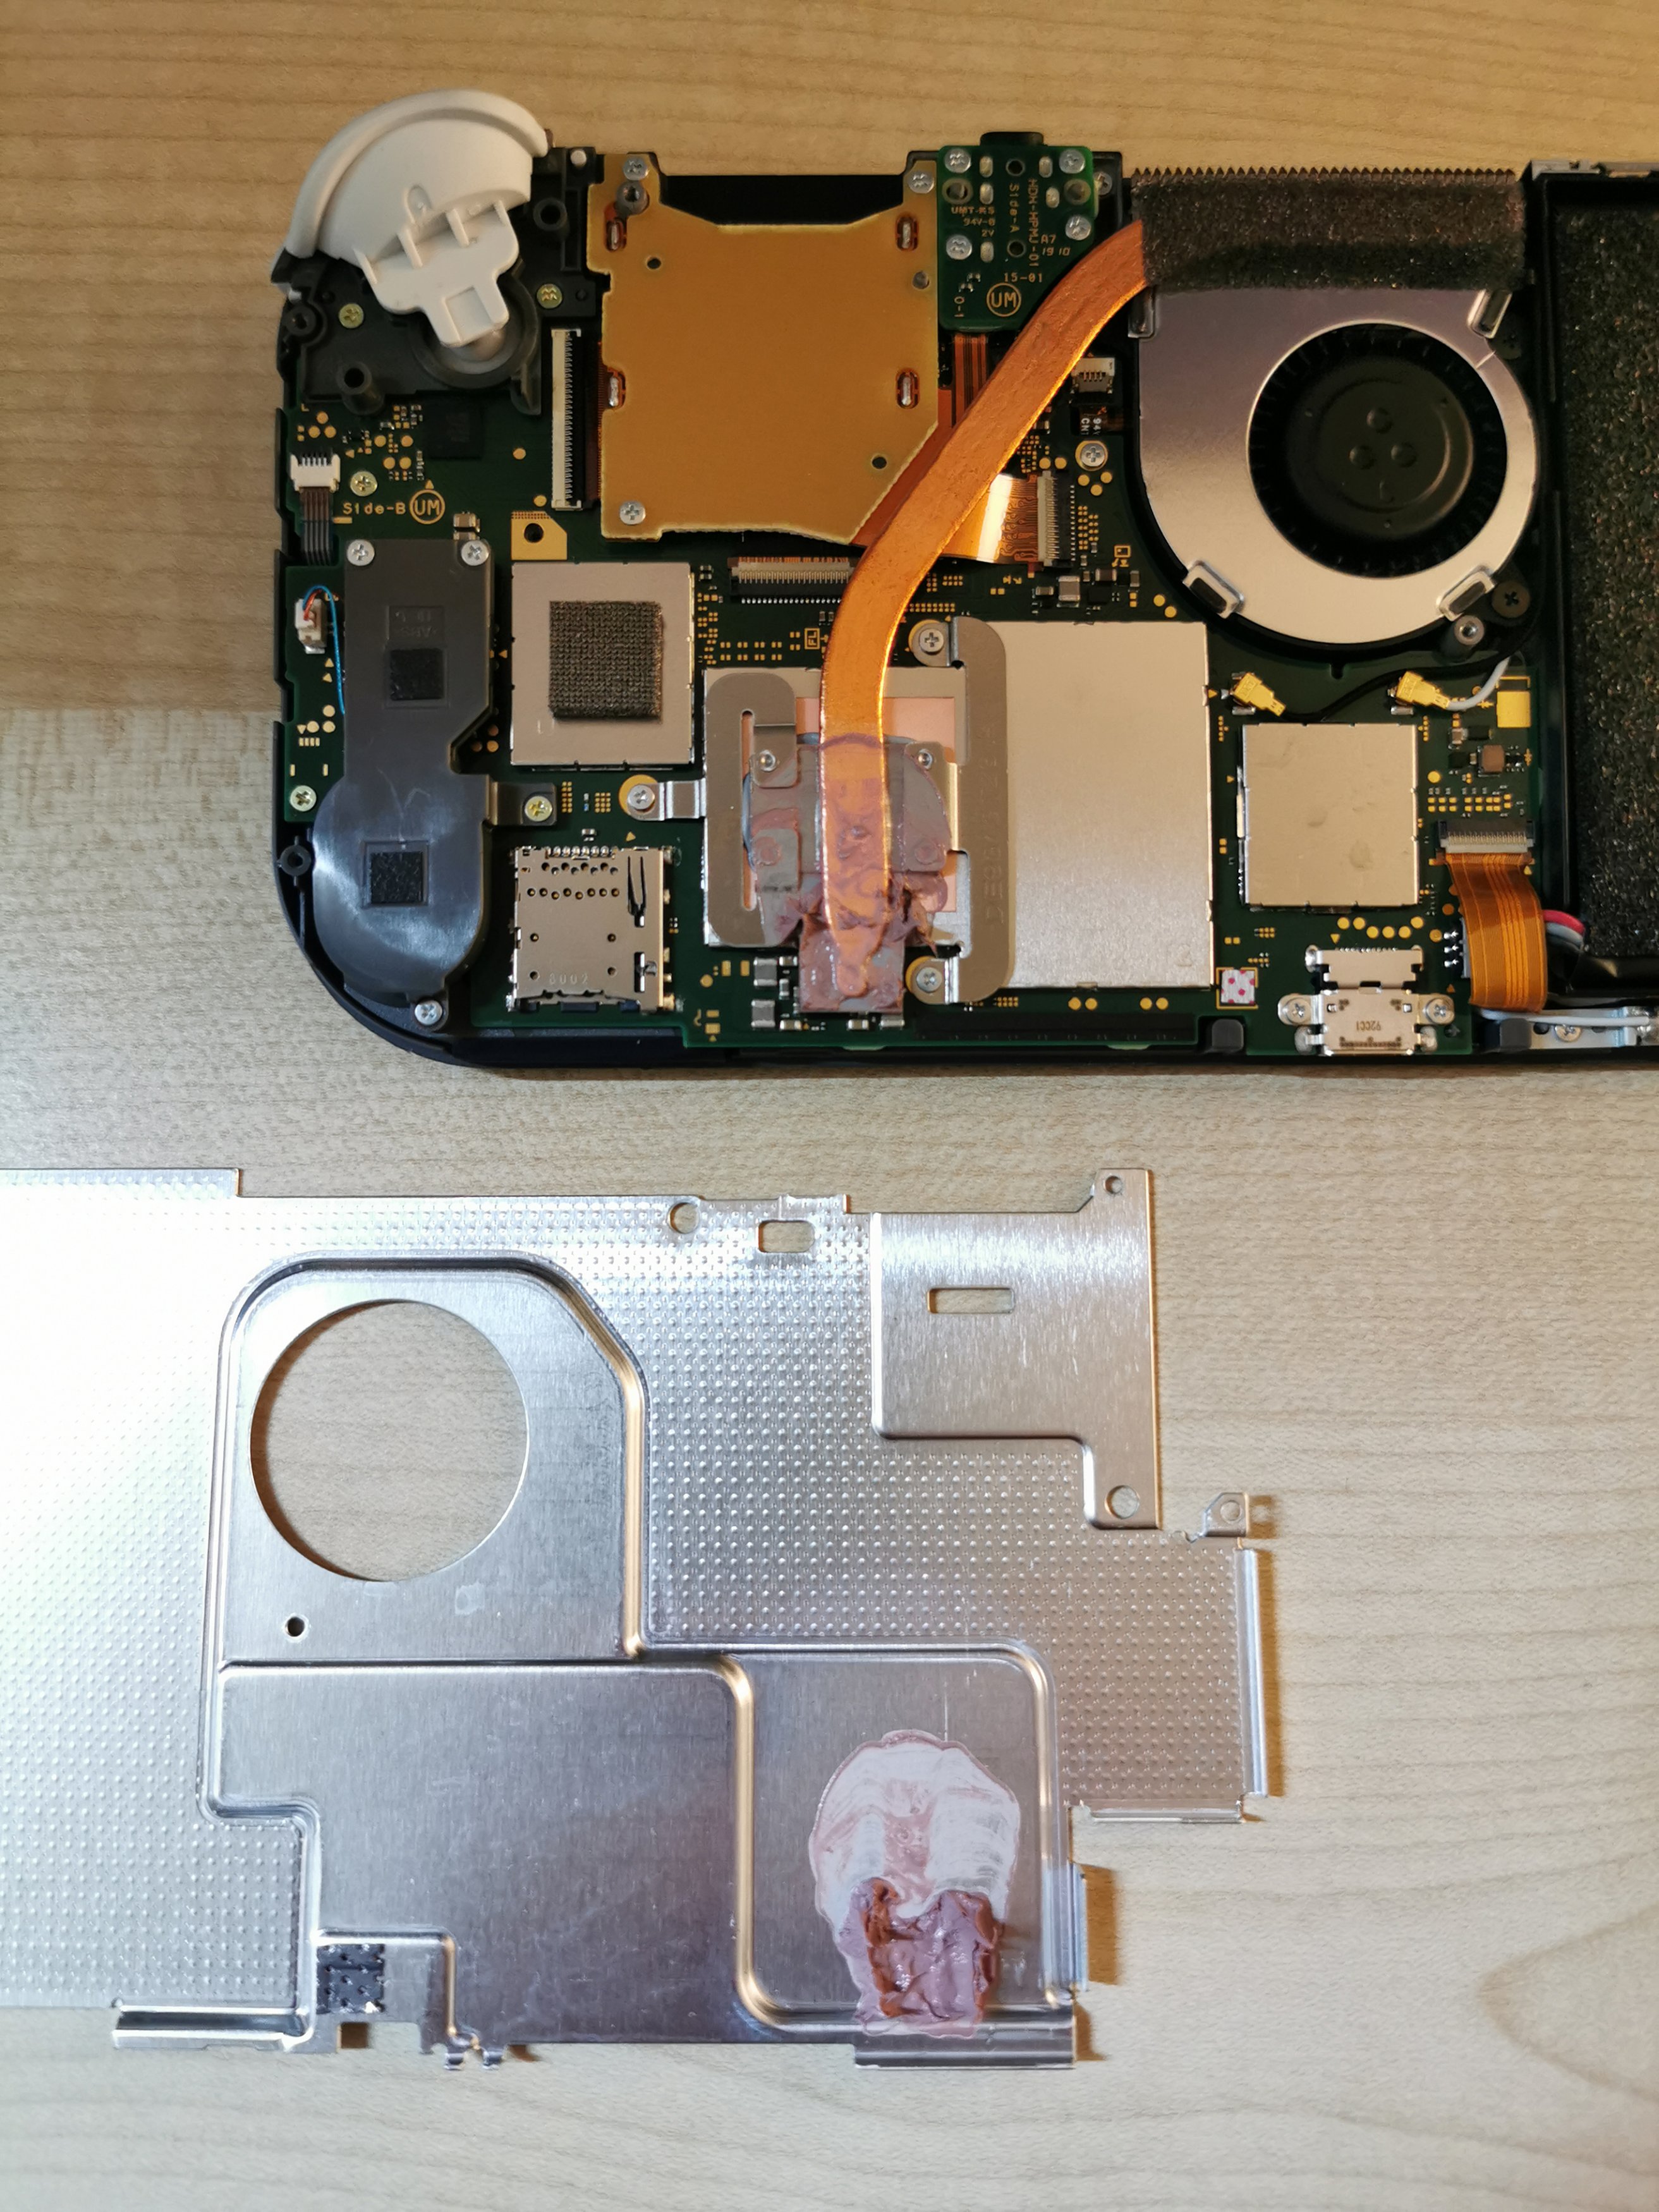 Switch Lite - Thermal Paste Needs Reapplication? | GBAtemp.net - The  Independent Video Game Community